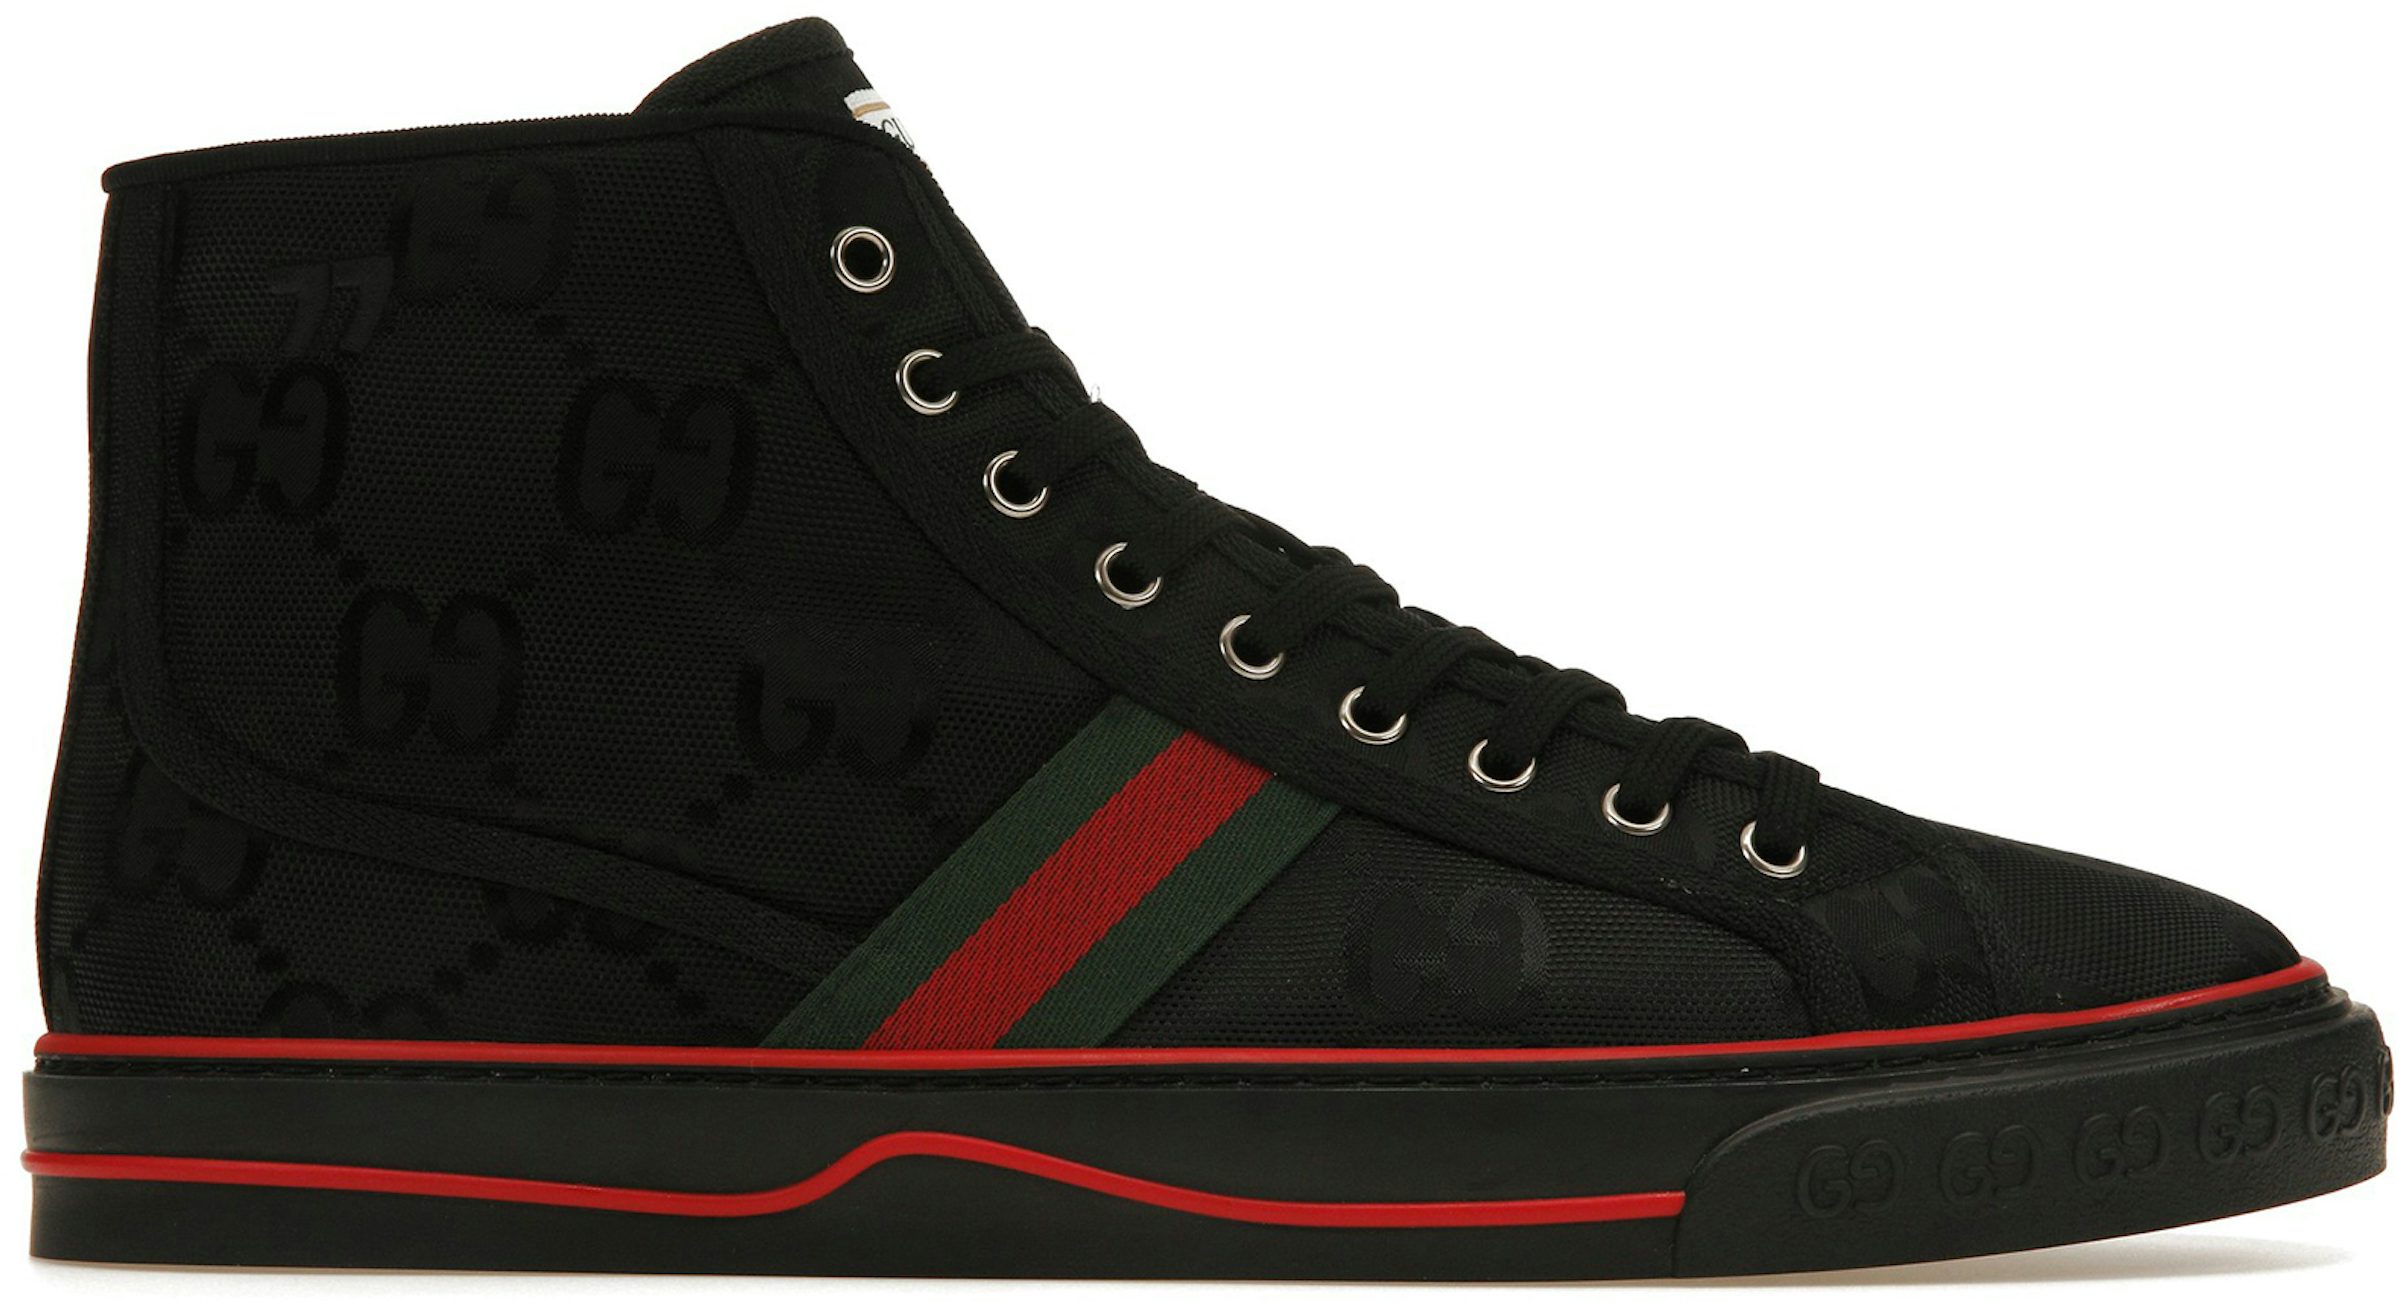 Gucci Double GG Red Bottom Sneaker Limited Edition Snake Skin